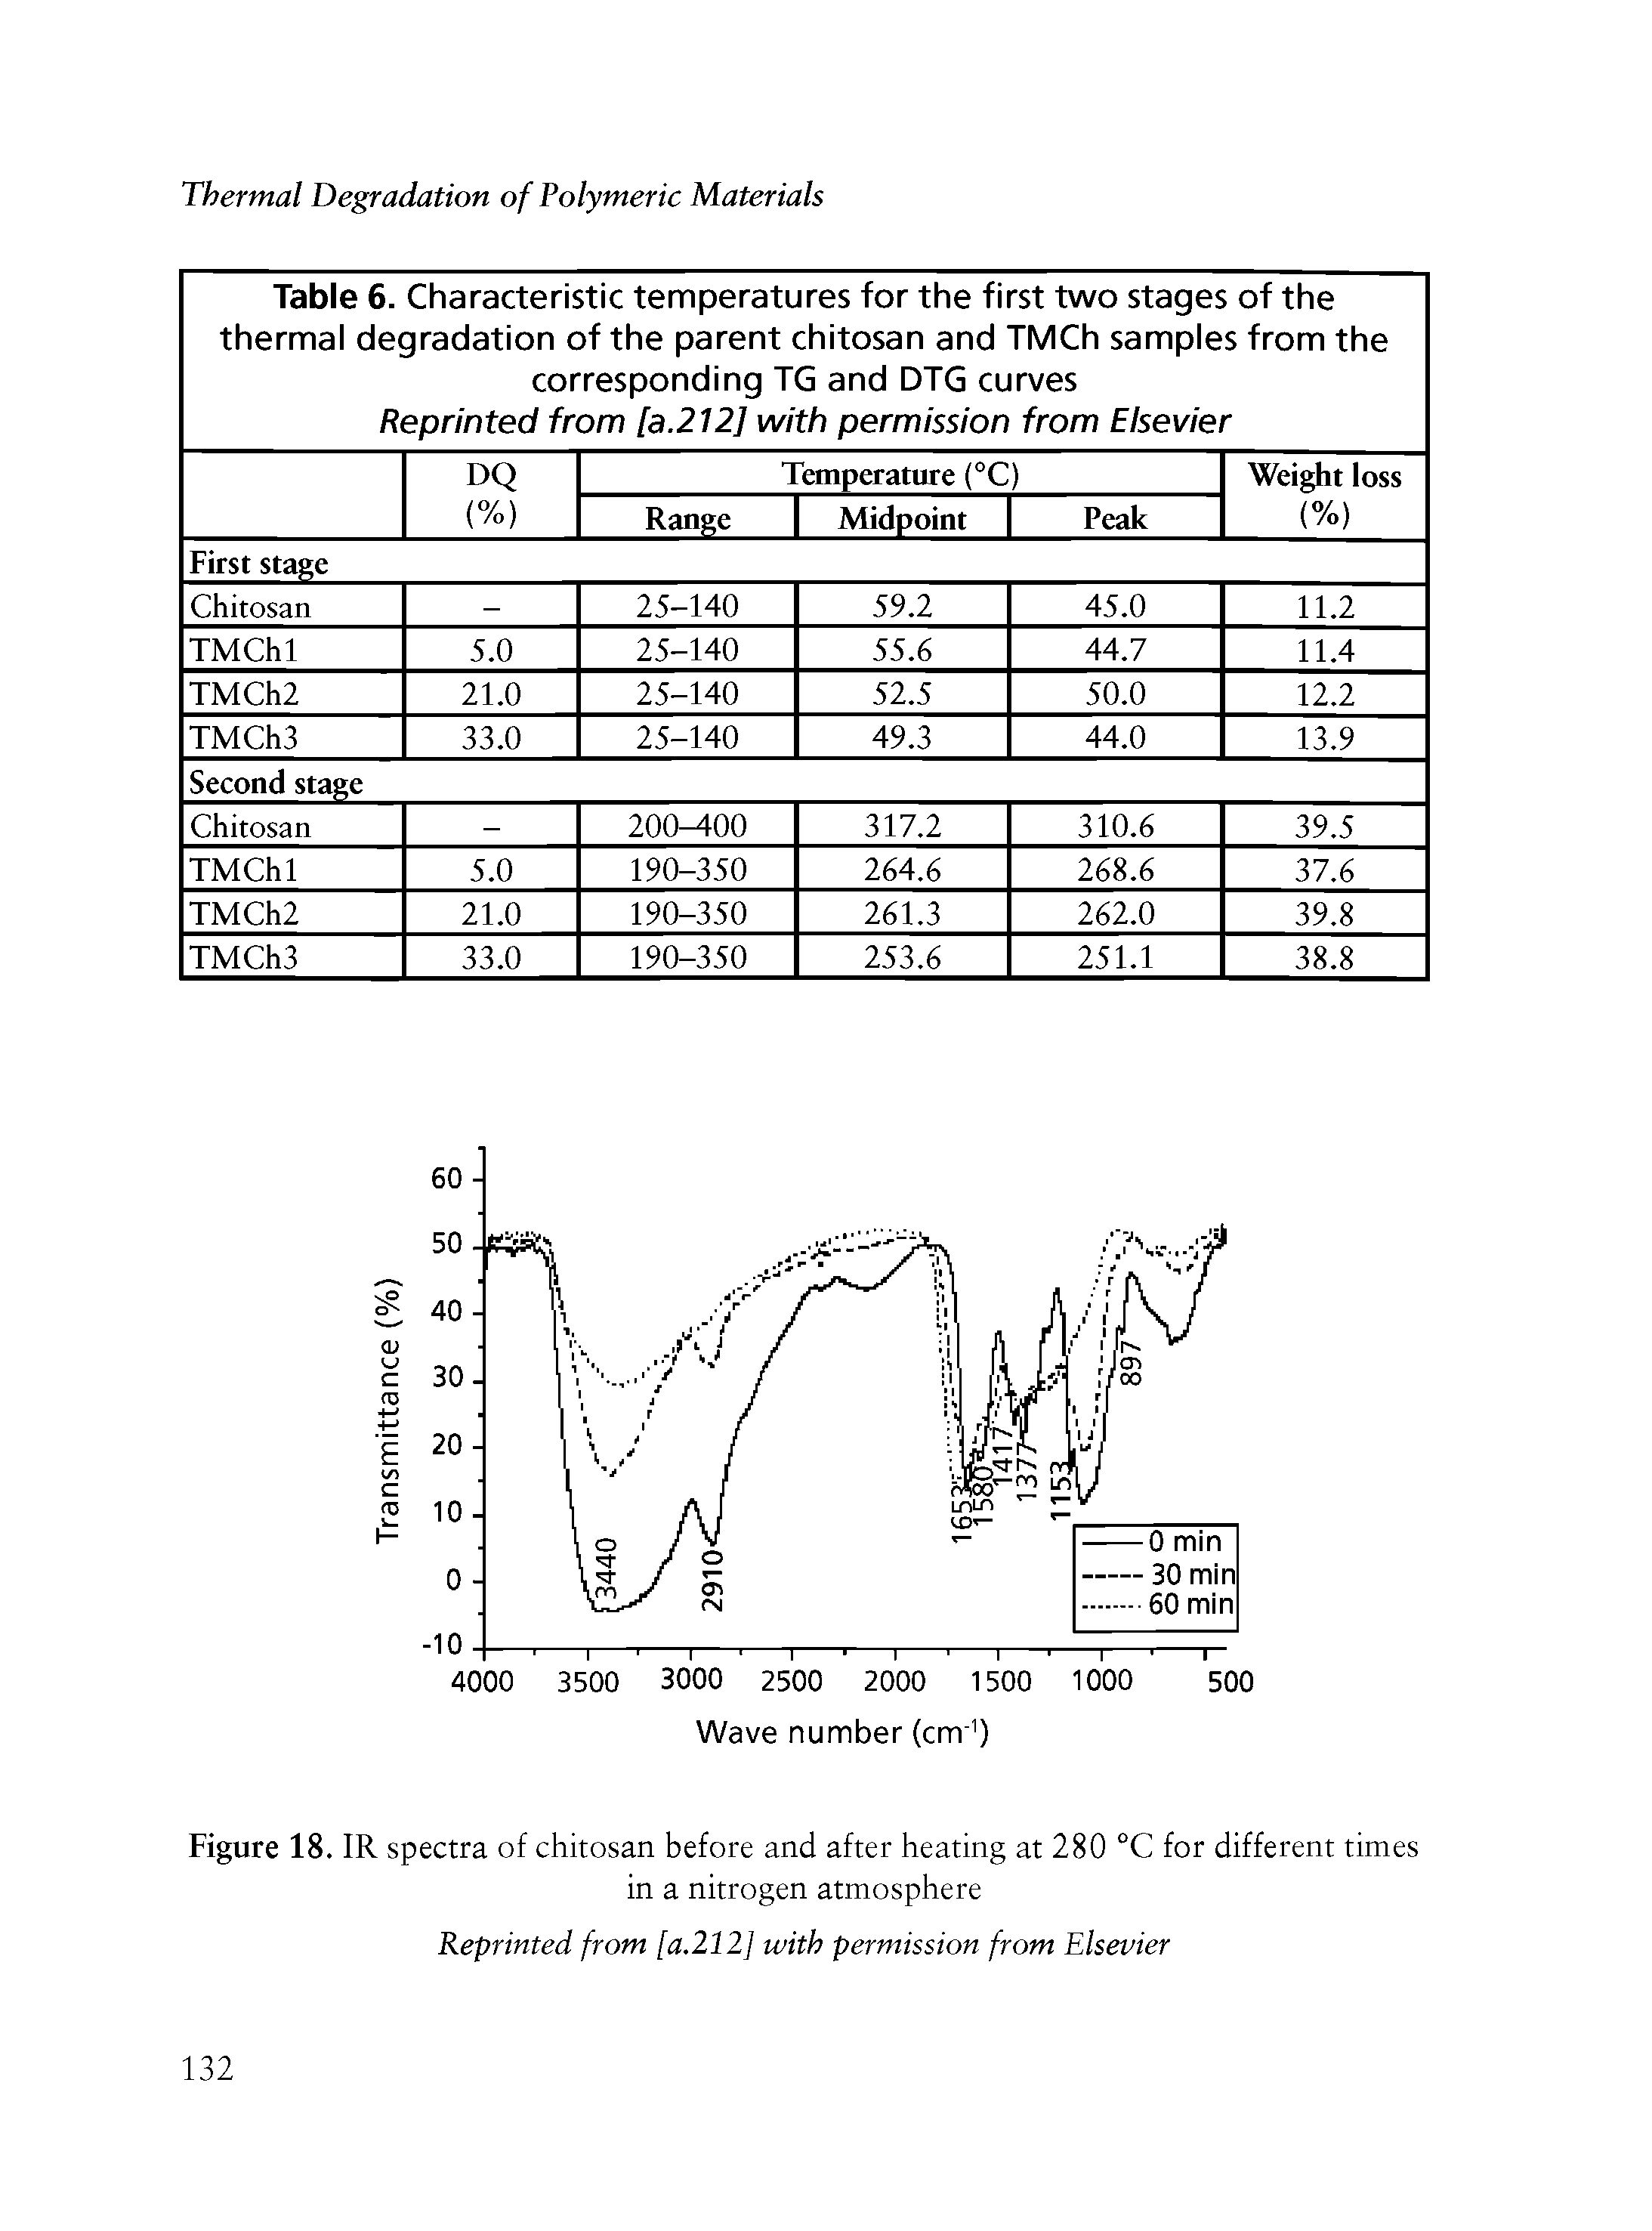 Table 6. Characteristic temperatures for the first two stages of the thermal degradation of the parent chitosan and TMCh samples from the ...